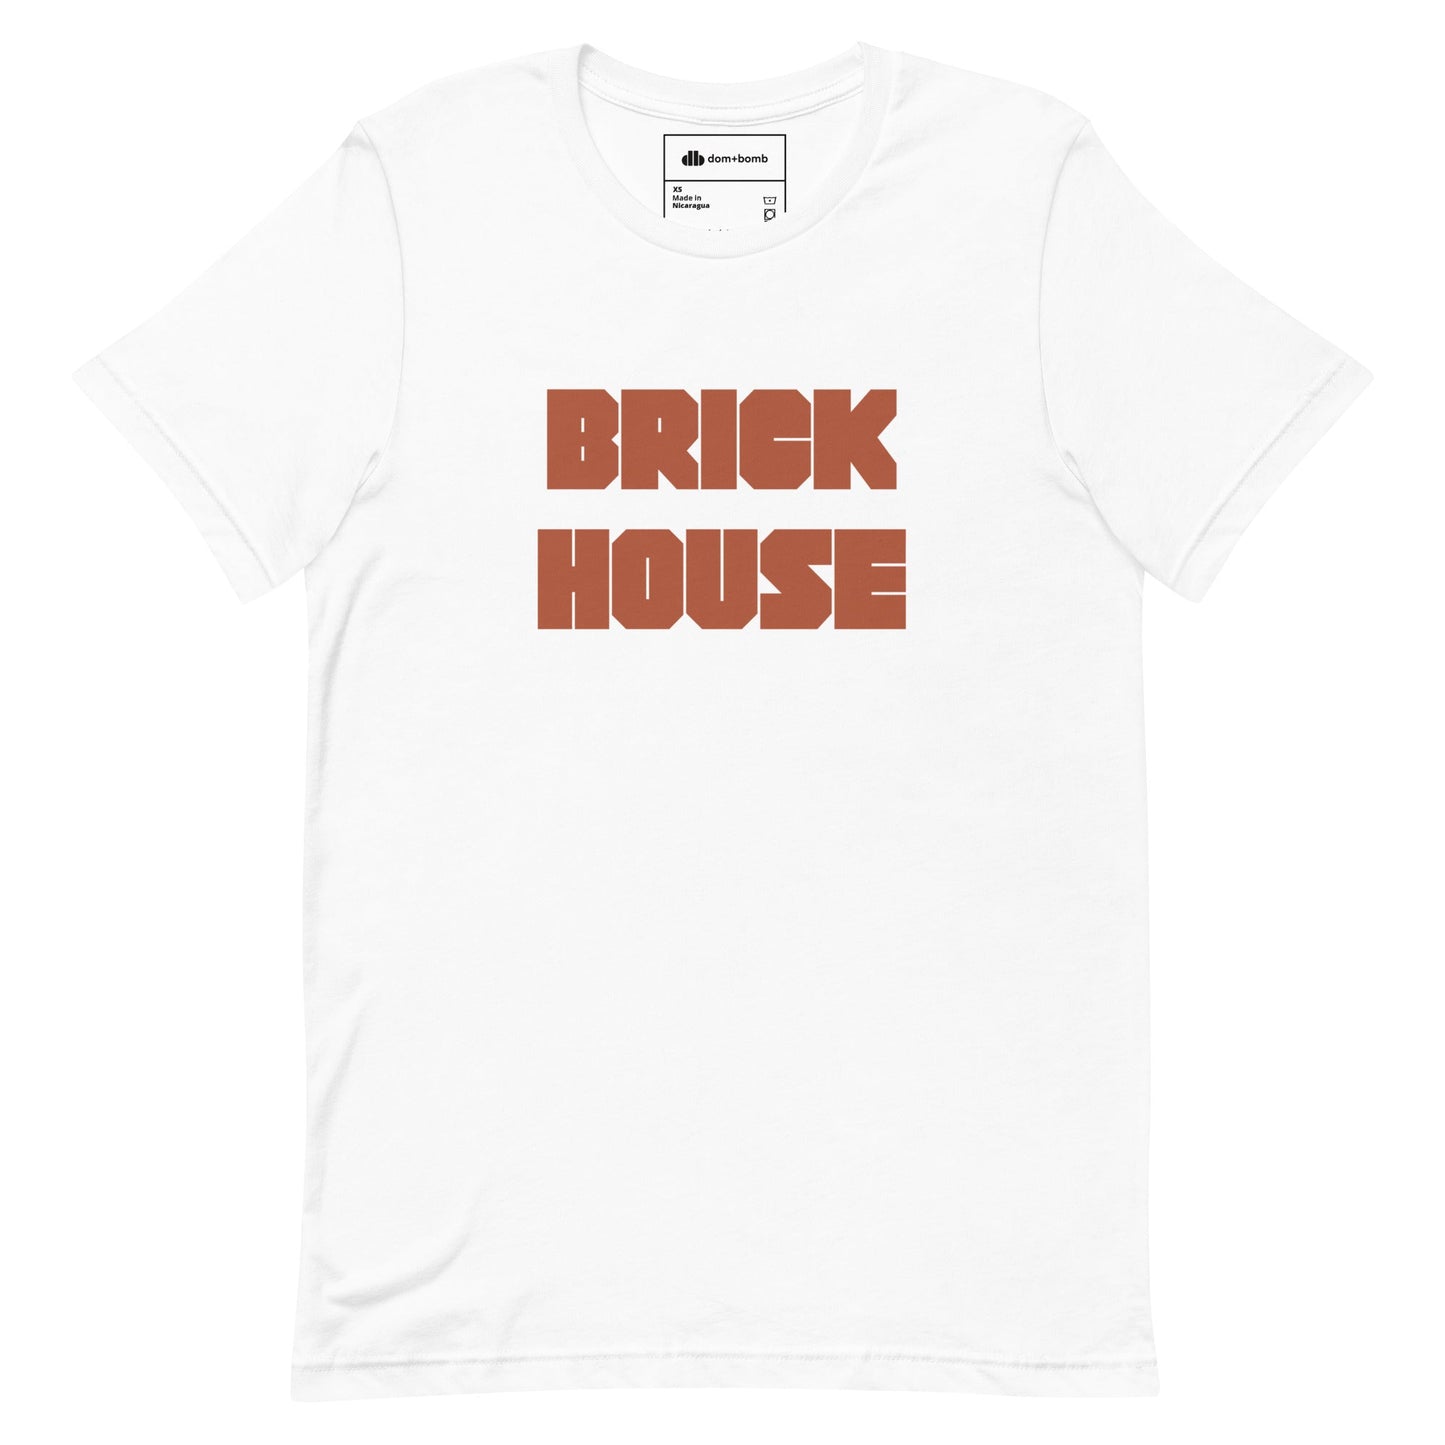 Brick House Definition T-shirt and Tank Top - dom+bomb